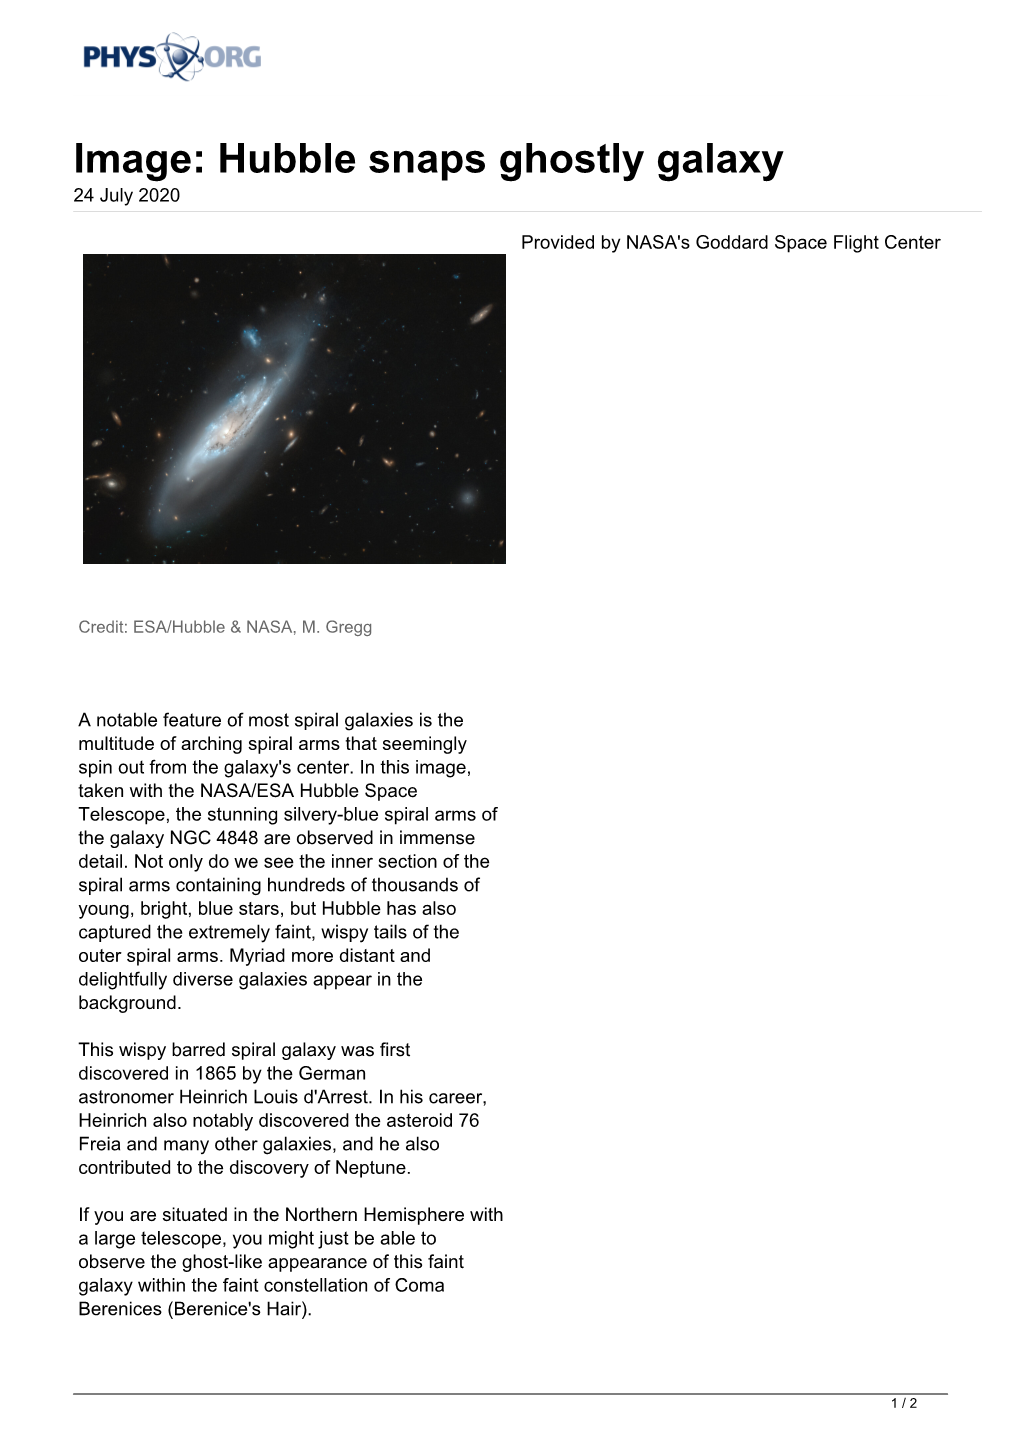 Hubble Snaps Ghostly Galaxy 24 July 2020